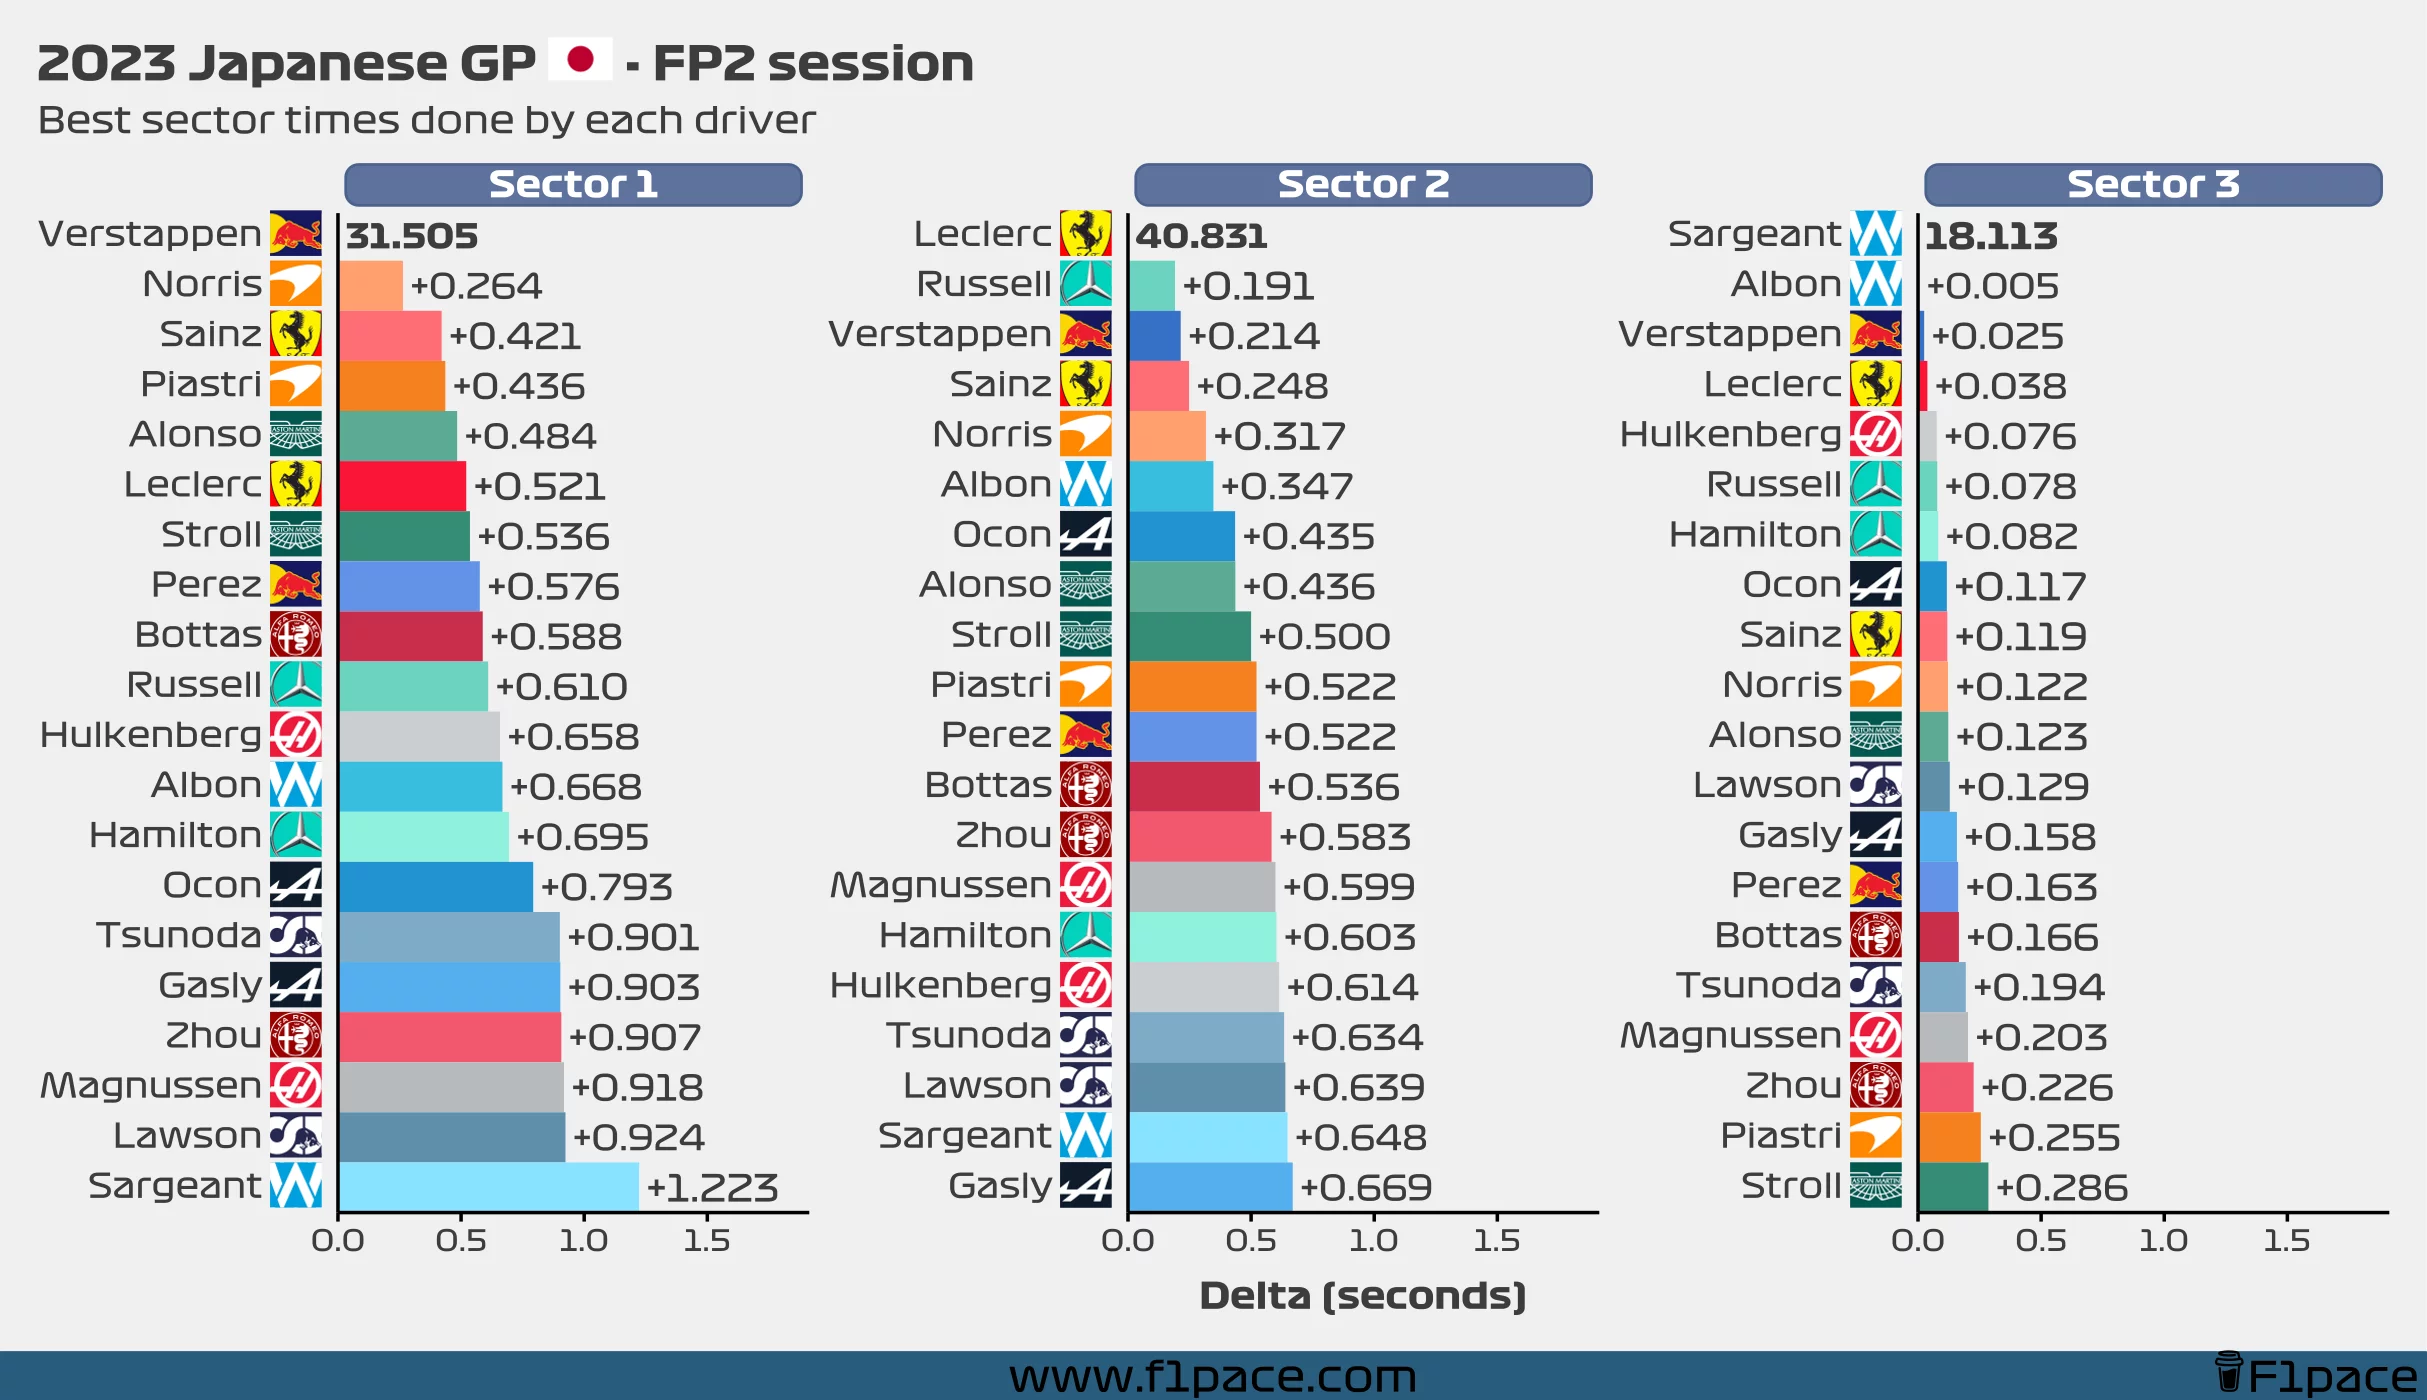 Best sector times for each driver